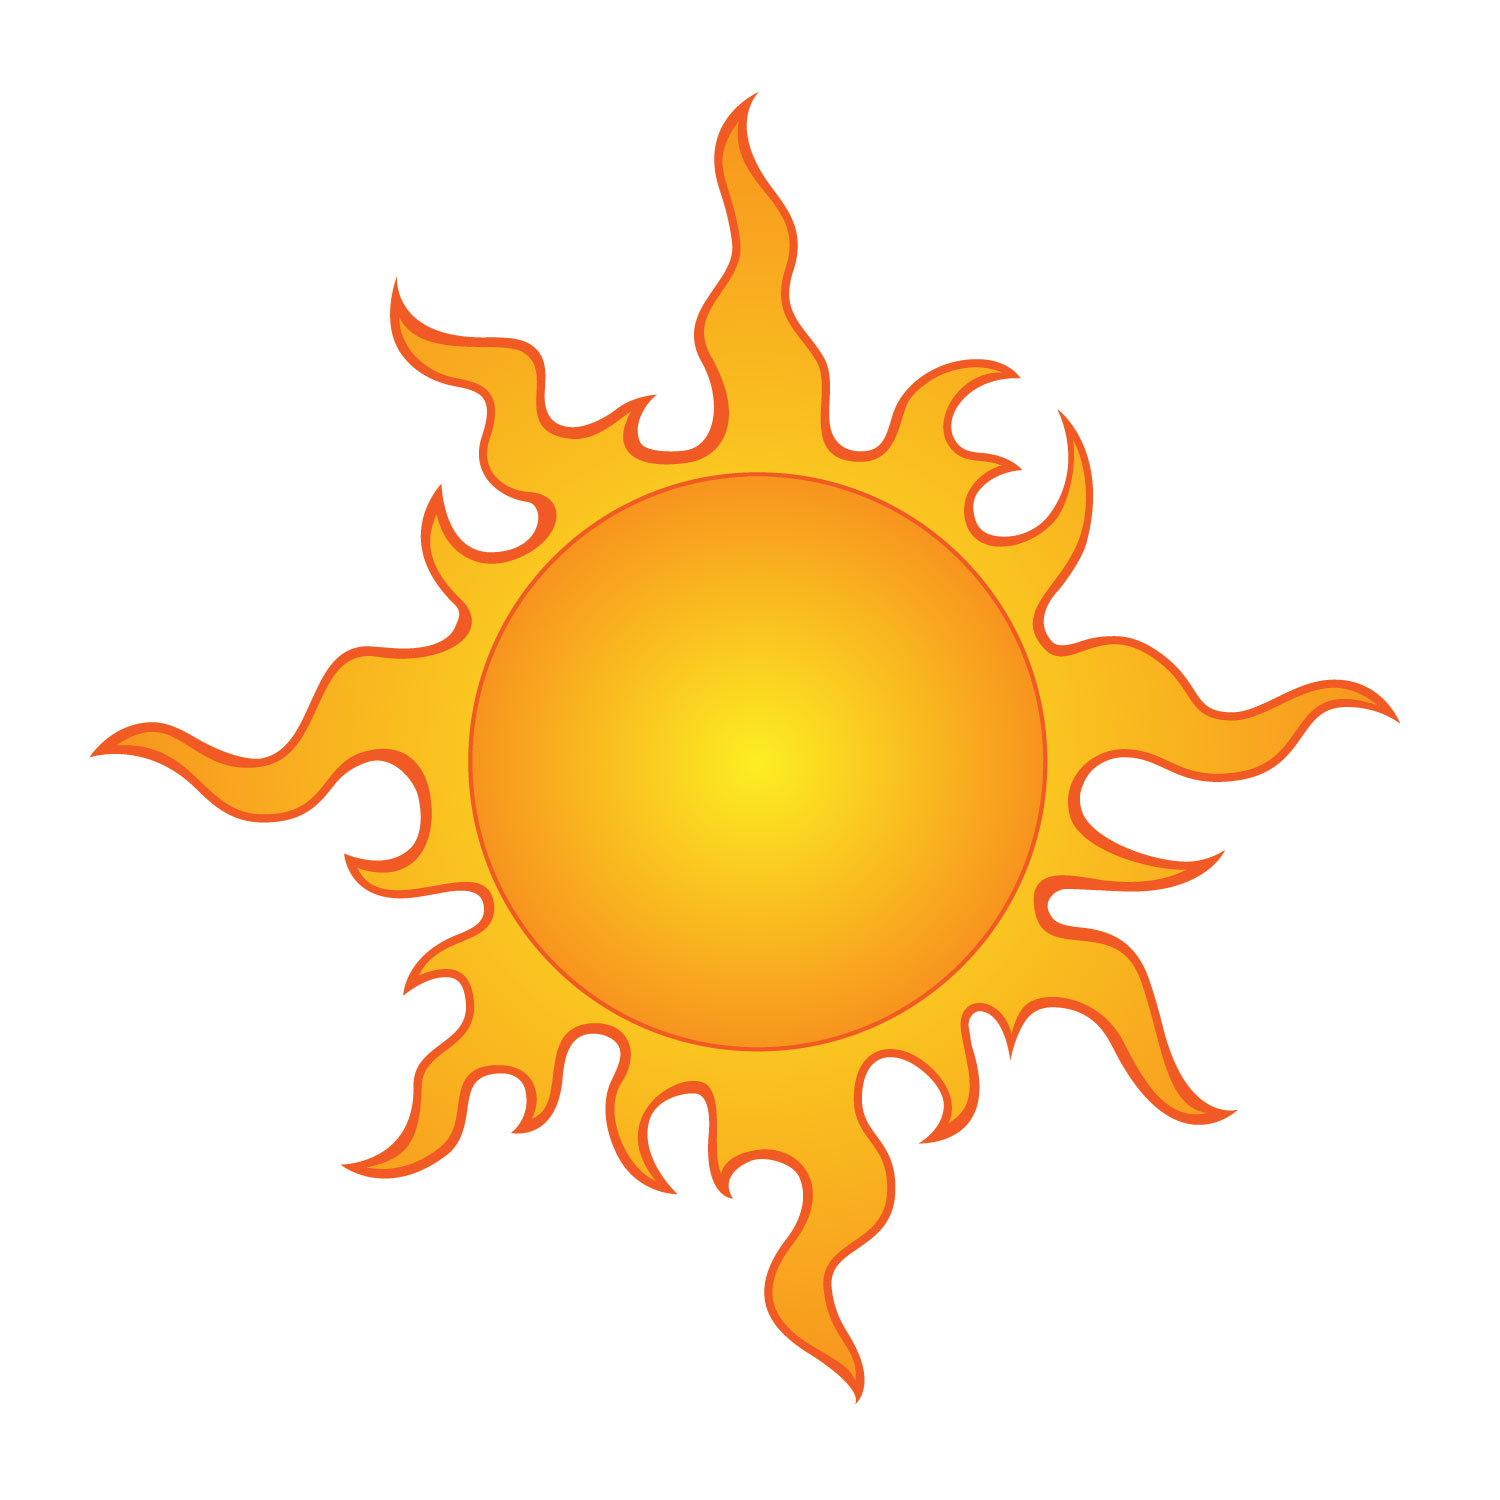 10 Sun Vector Graphic Images